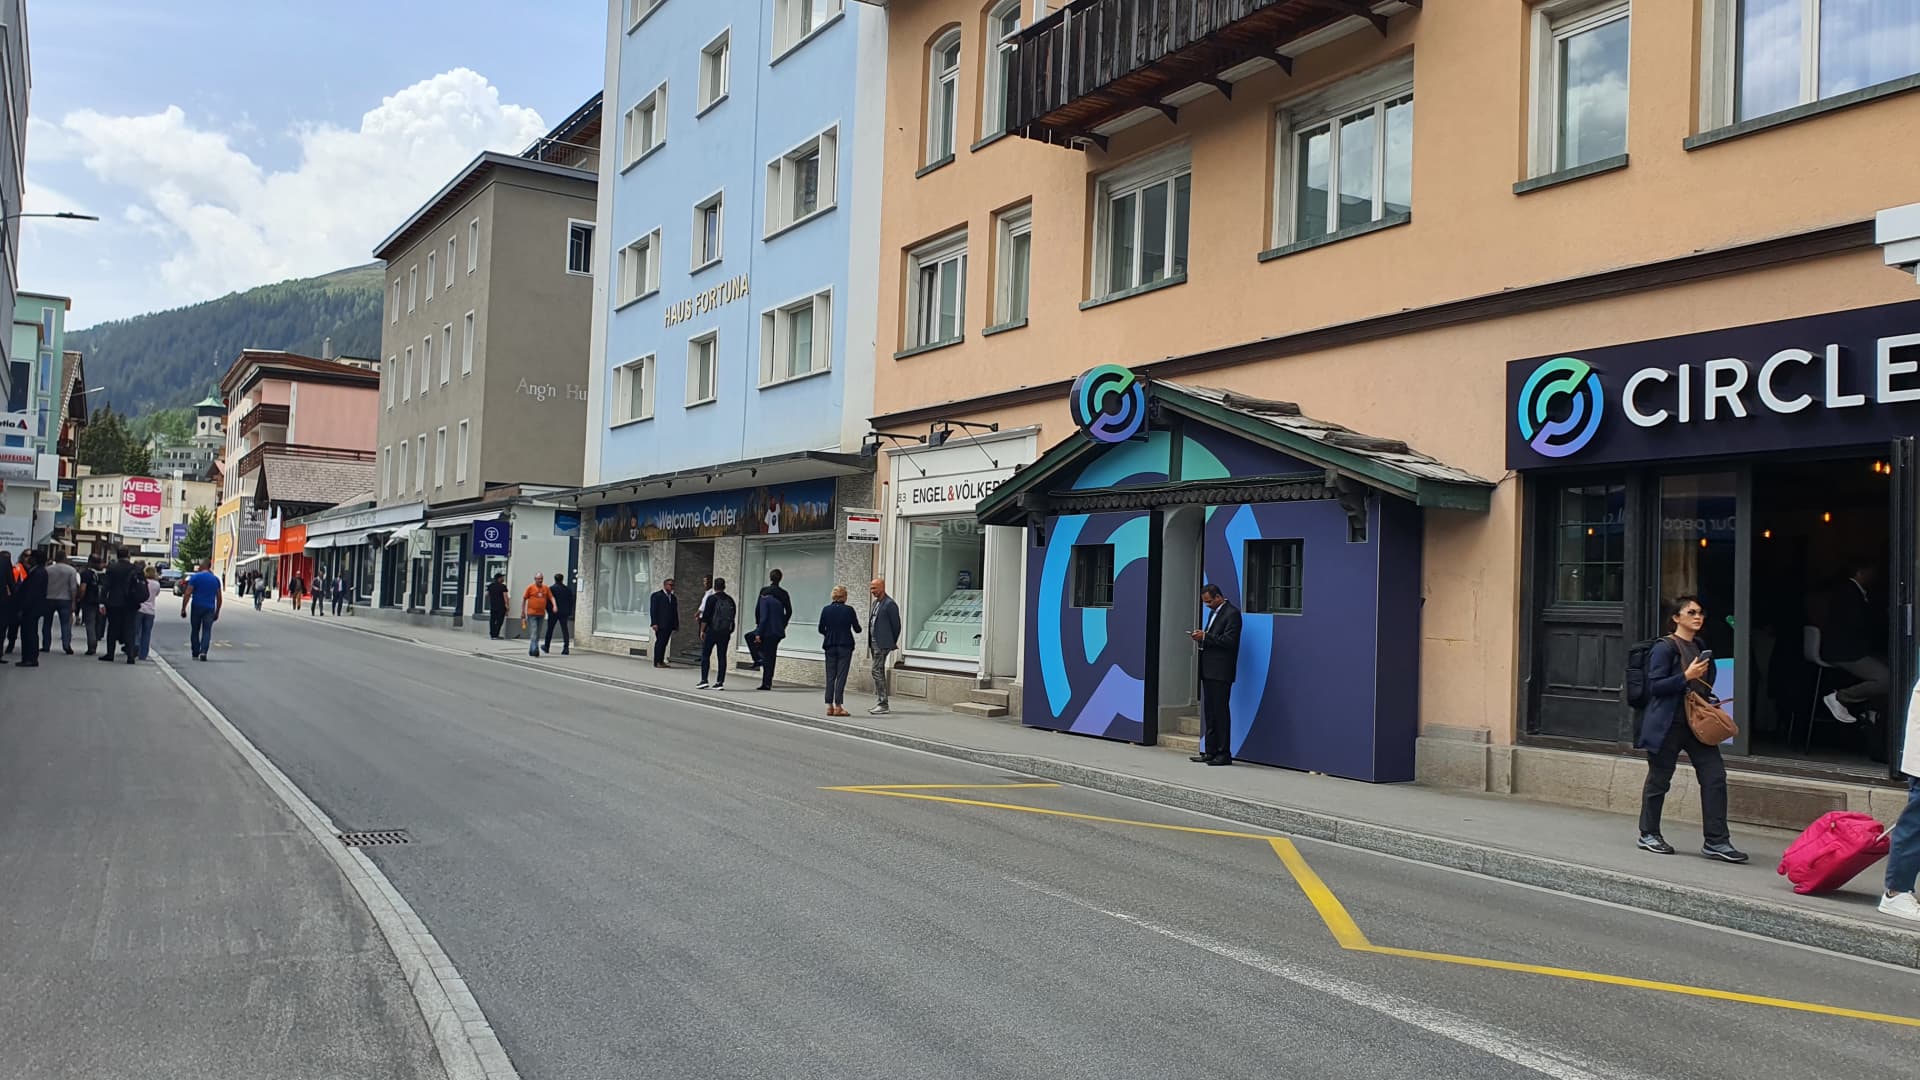 Circle, which is one of the companies behind the USDC stablecoin, took over one of the shops on the Davos Promenade.